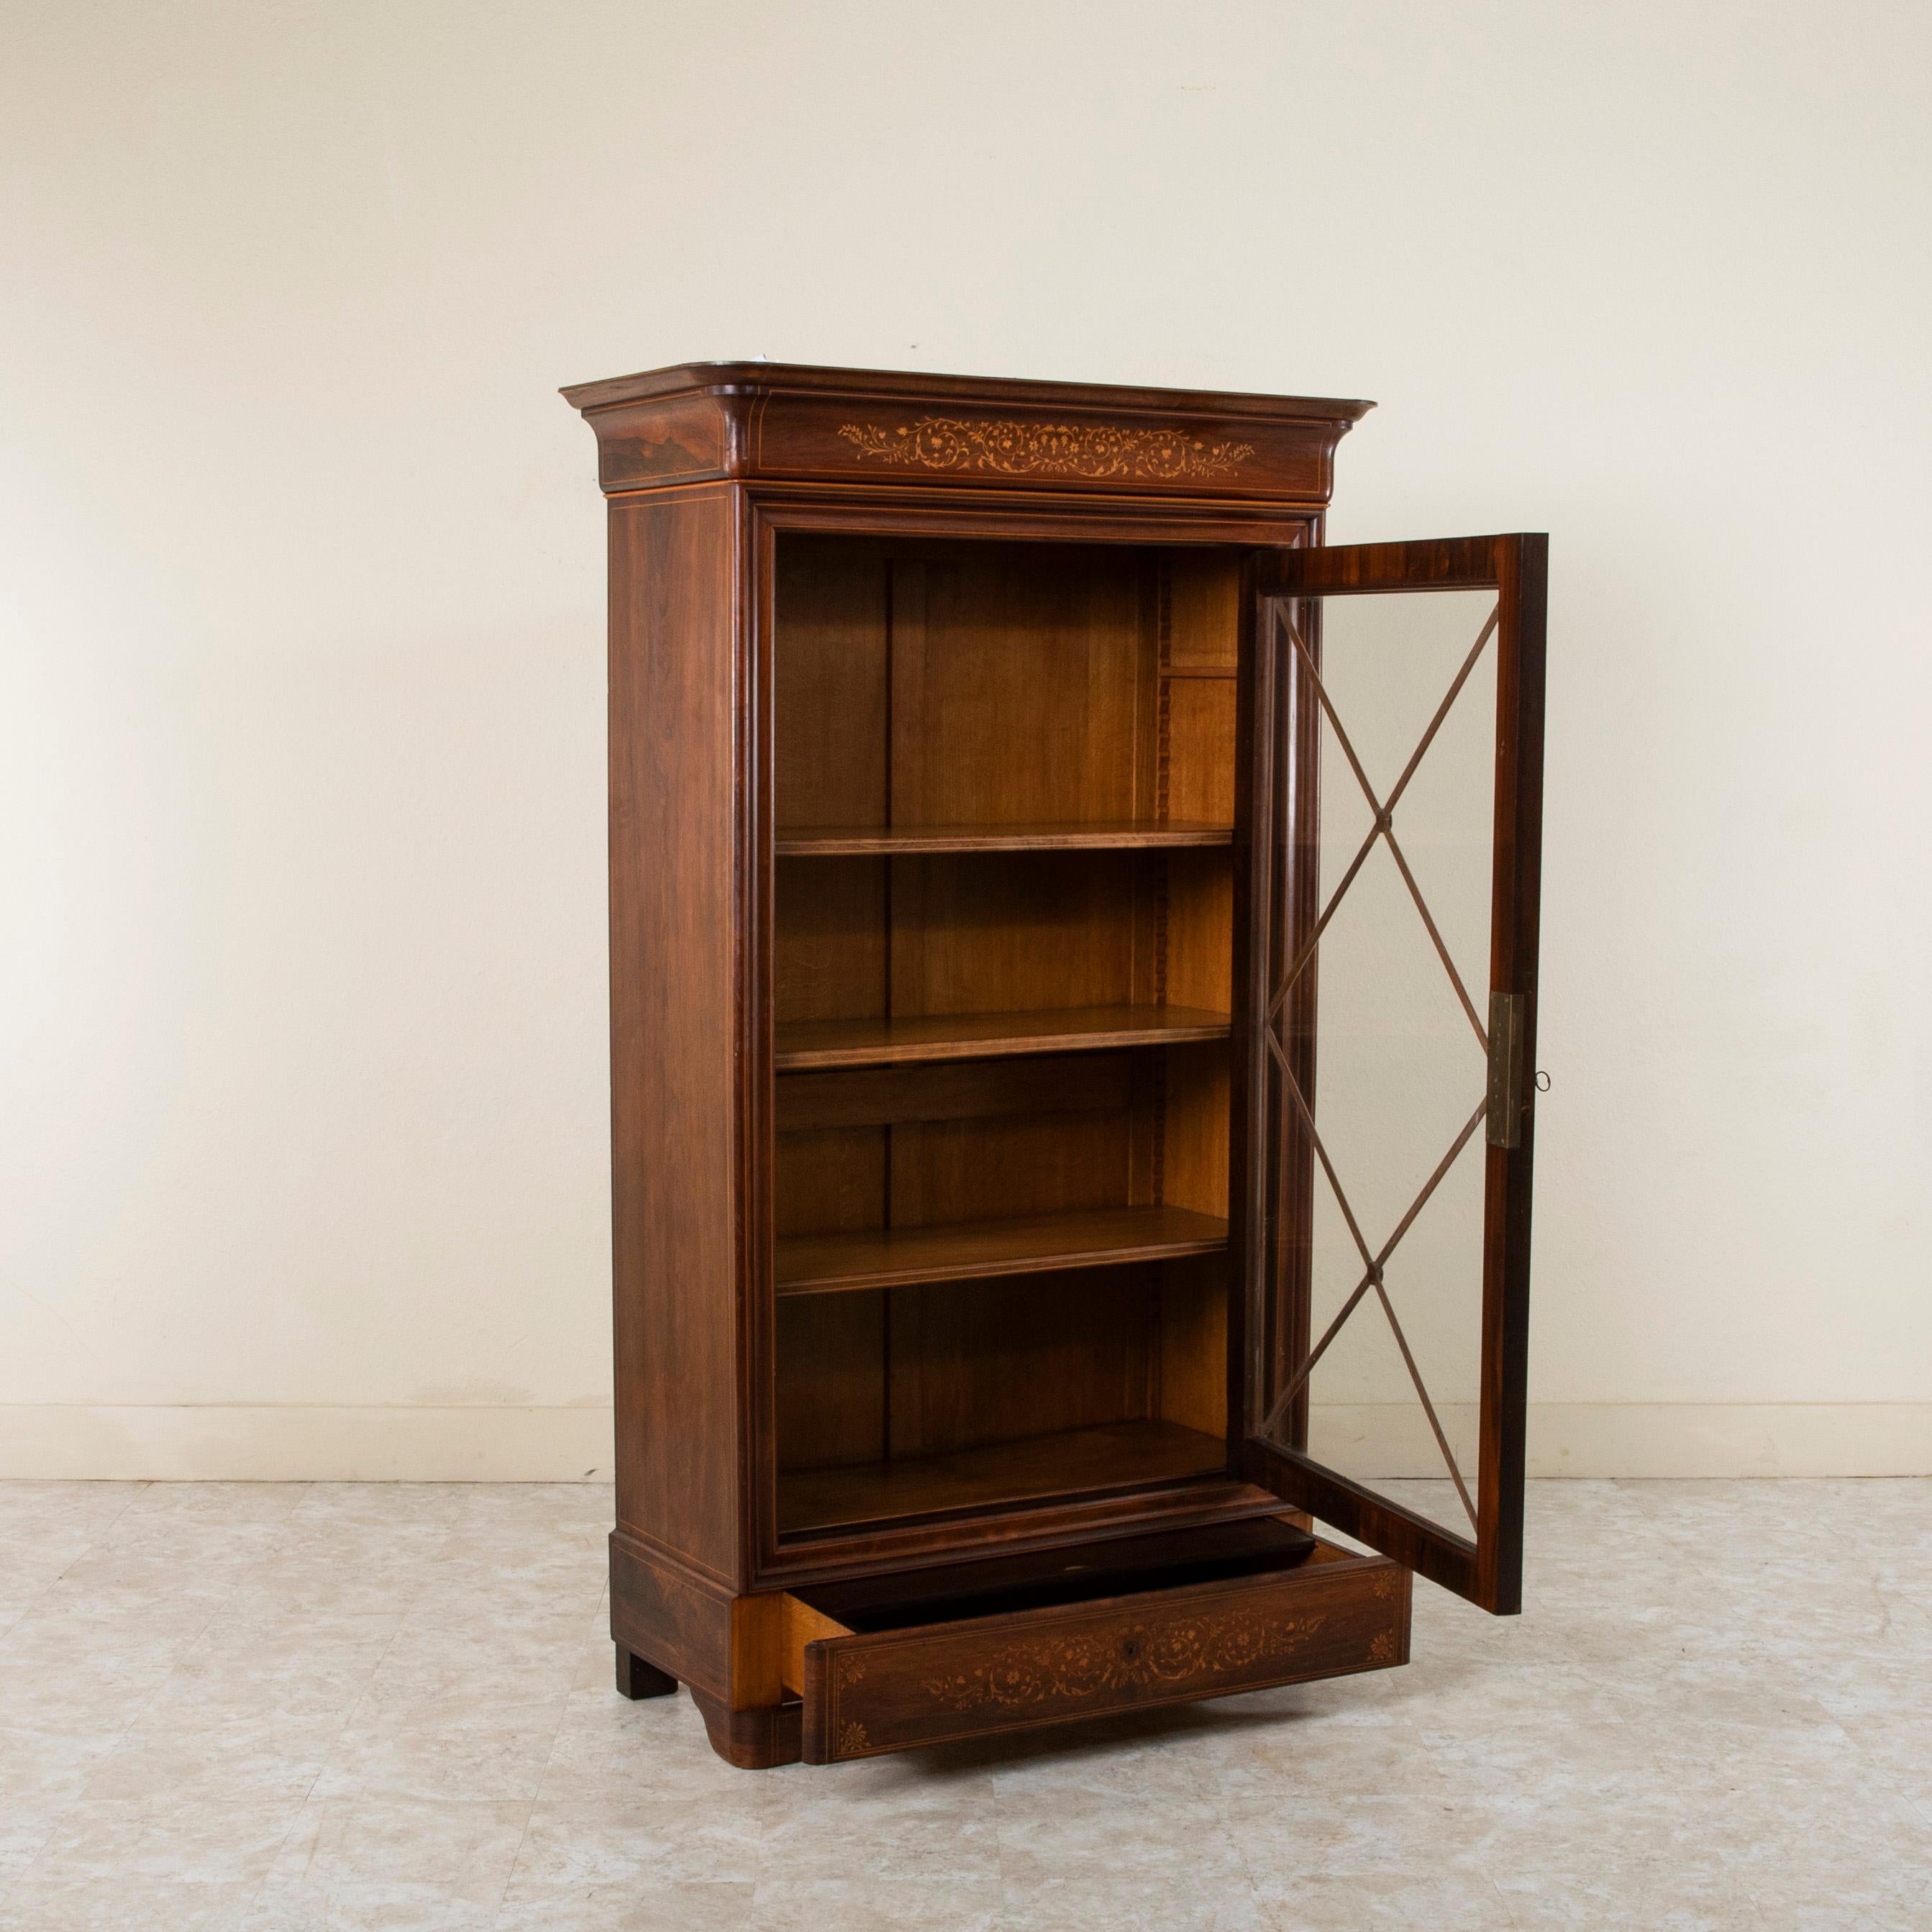 Early 19th Century French Charles X Period Mahogany Bookcase or Vitrine For Sale 1